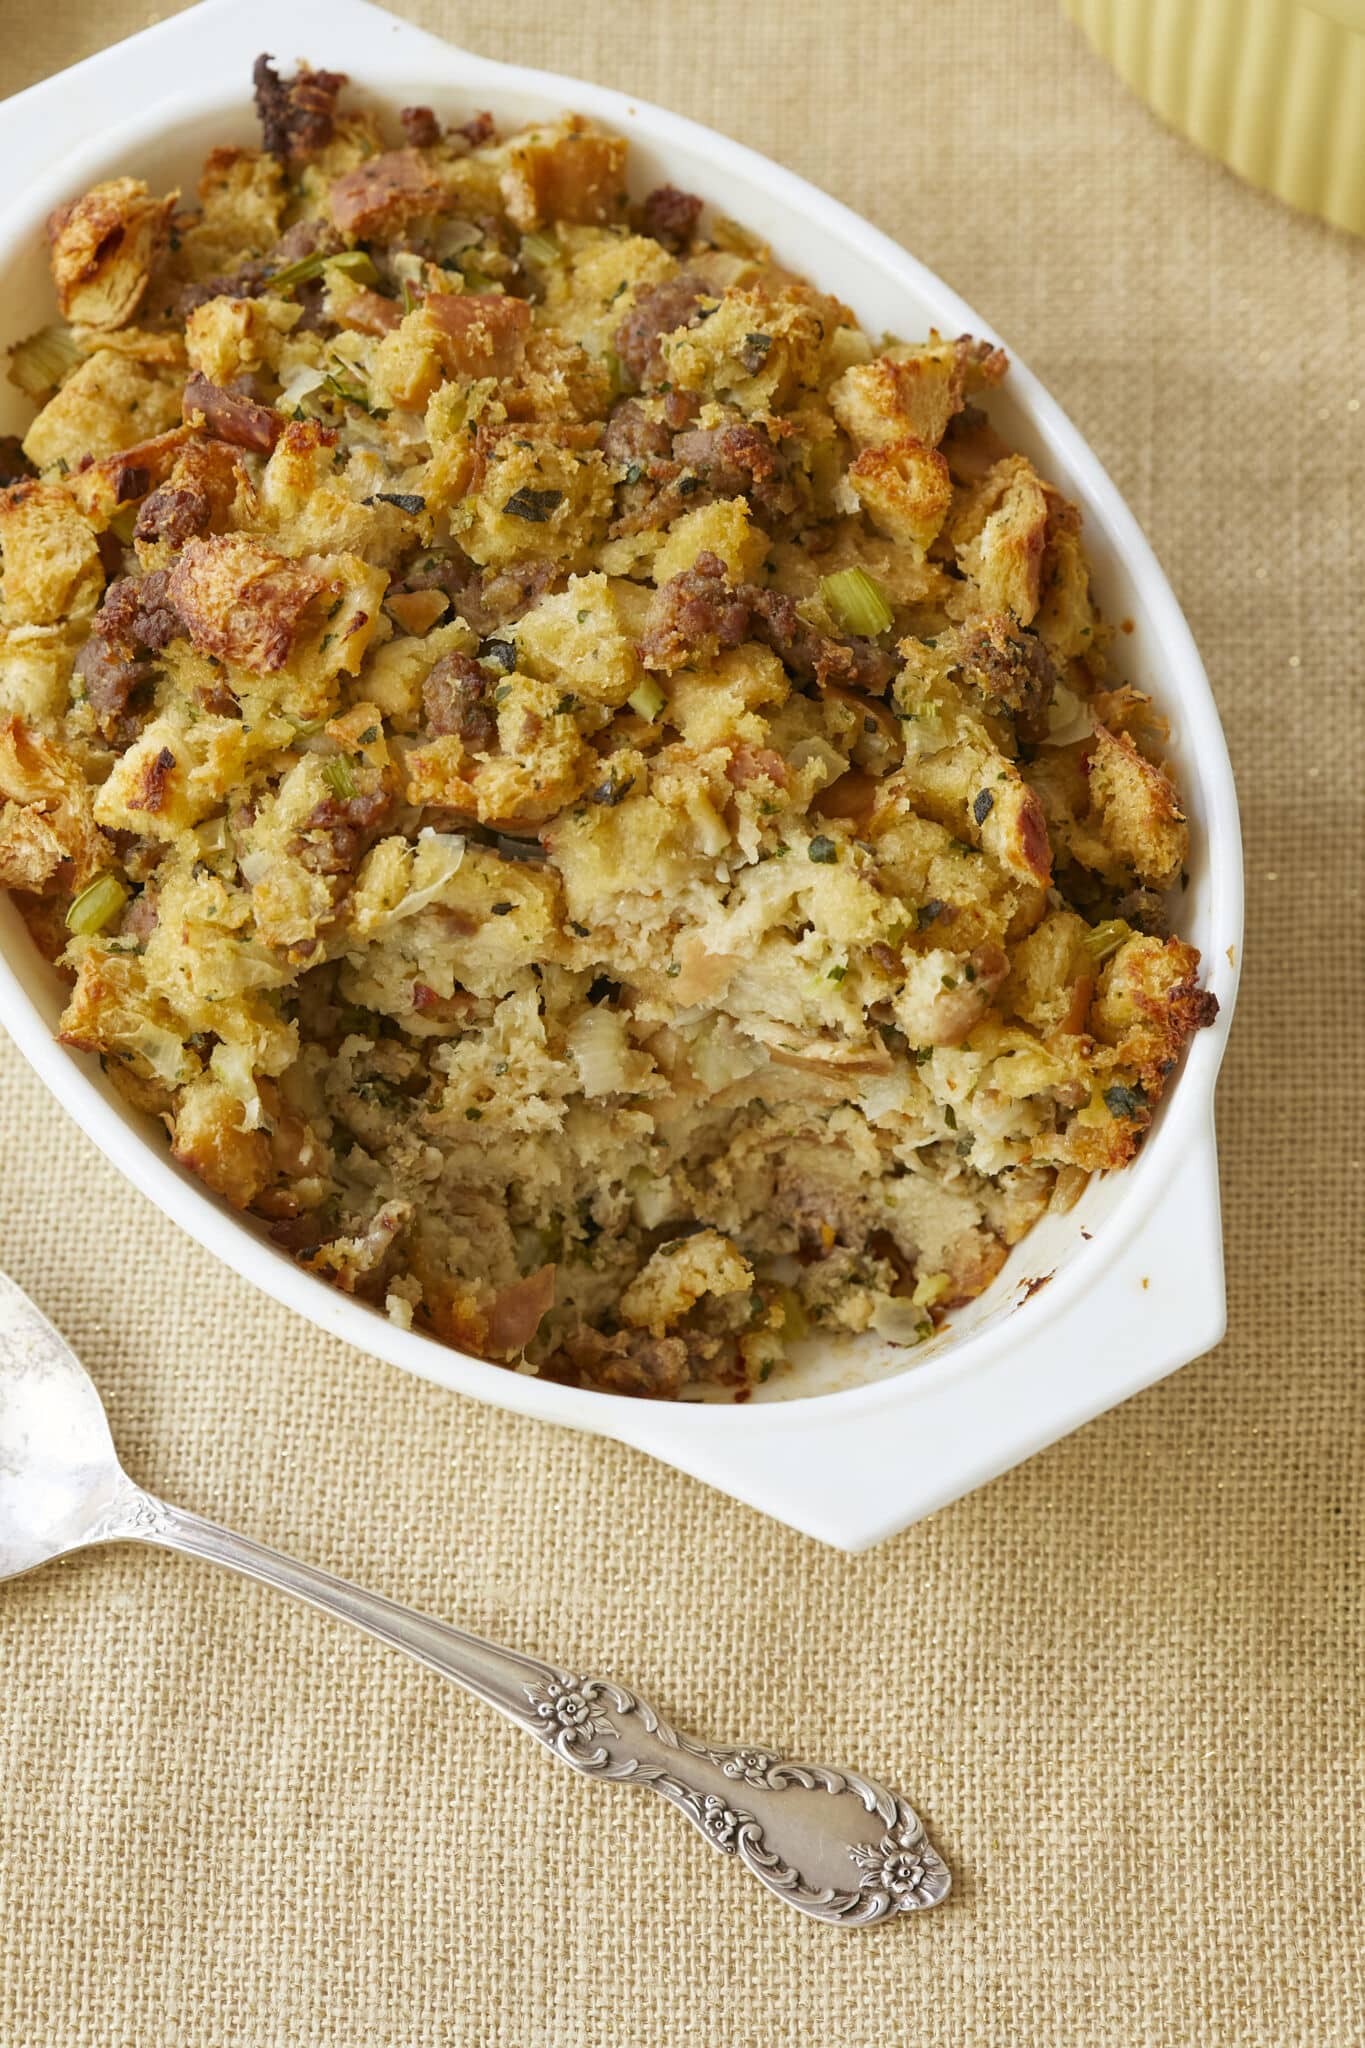 Classic Sage Sausage Stuffing is baked in a white milk galss baking dish. Toasted white bread is tossed with savory sausage, earthy sage, and aromatic onion and celery, mixed with in eggs and broth to a fluffy, moist casserole with tempting craggy browned bits!